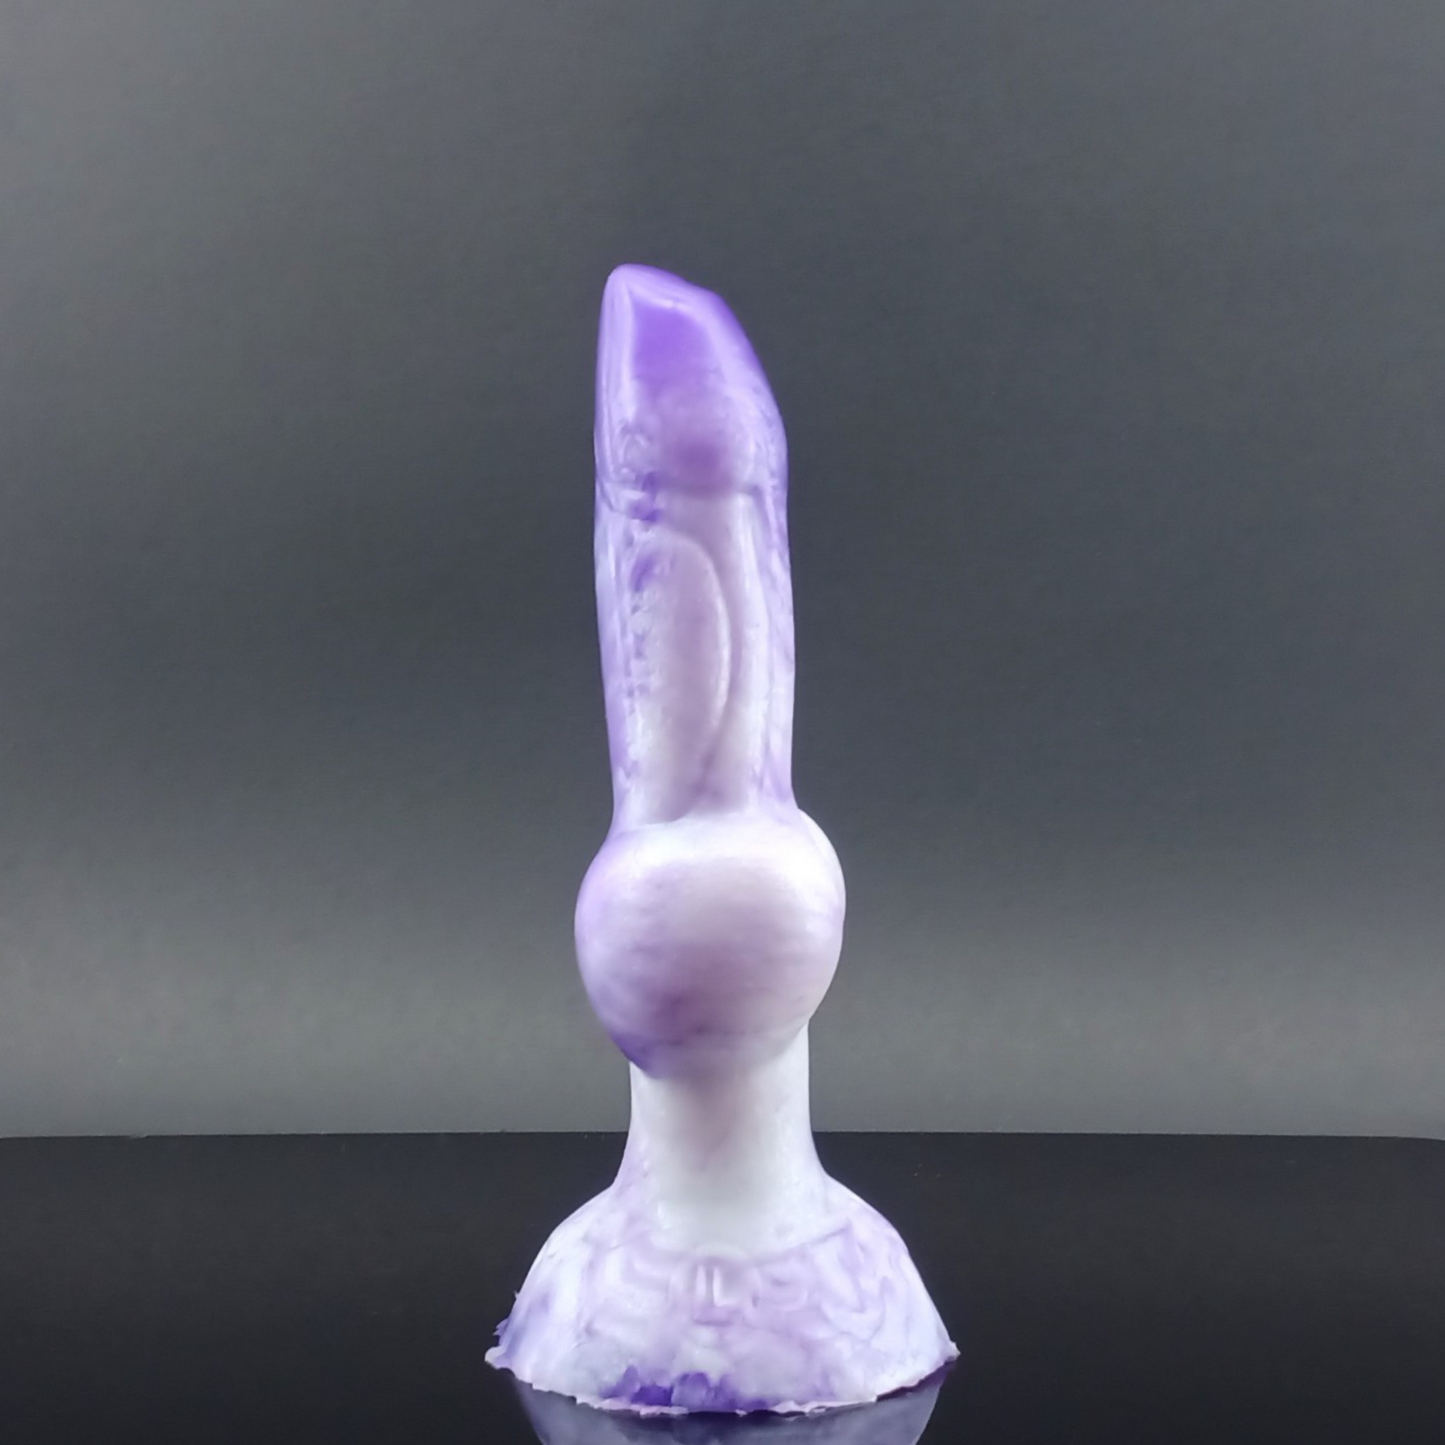 Dggo - Knot Dildo - Small Size - Purple and White Marble - GITD - 00-30 Firmness - Suction Cup